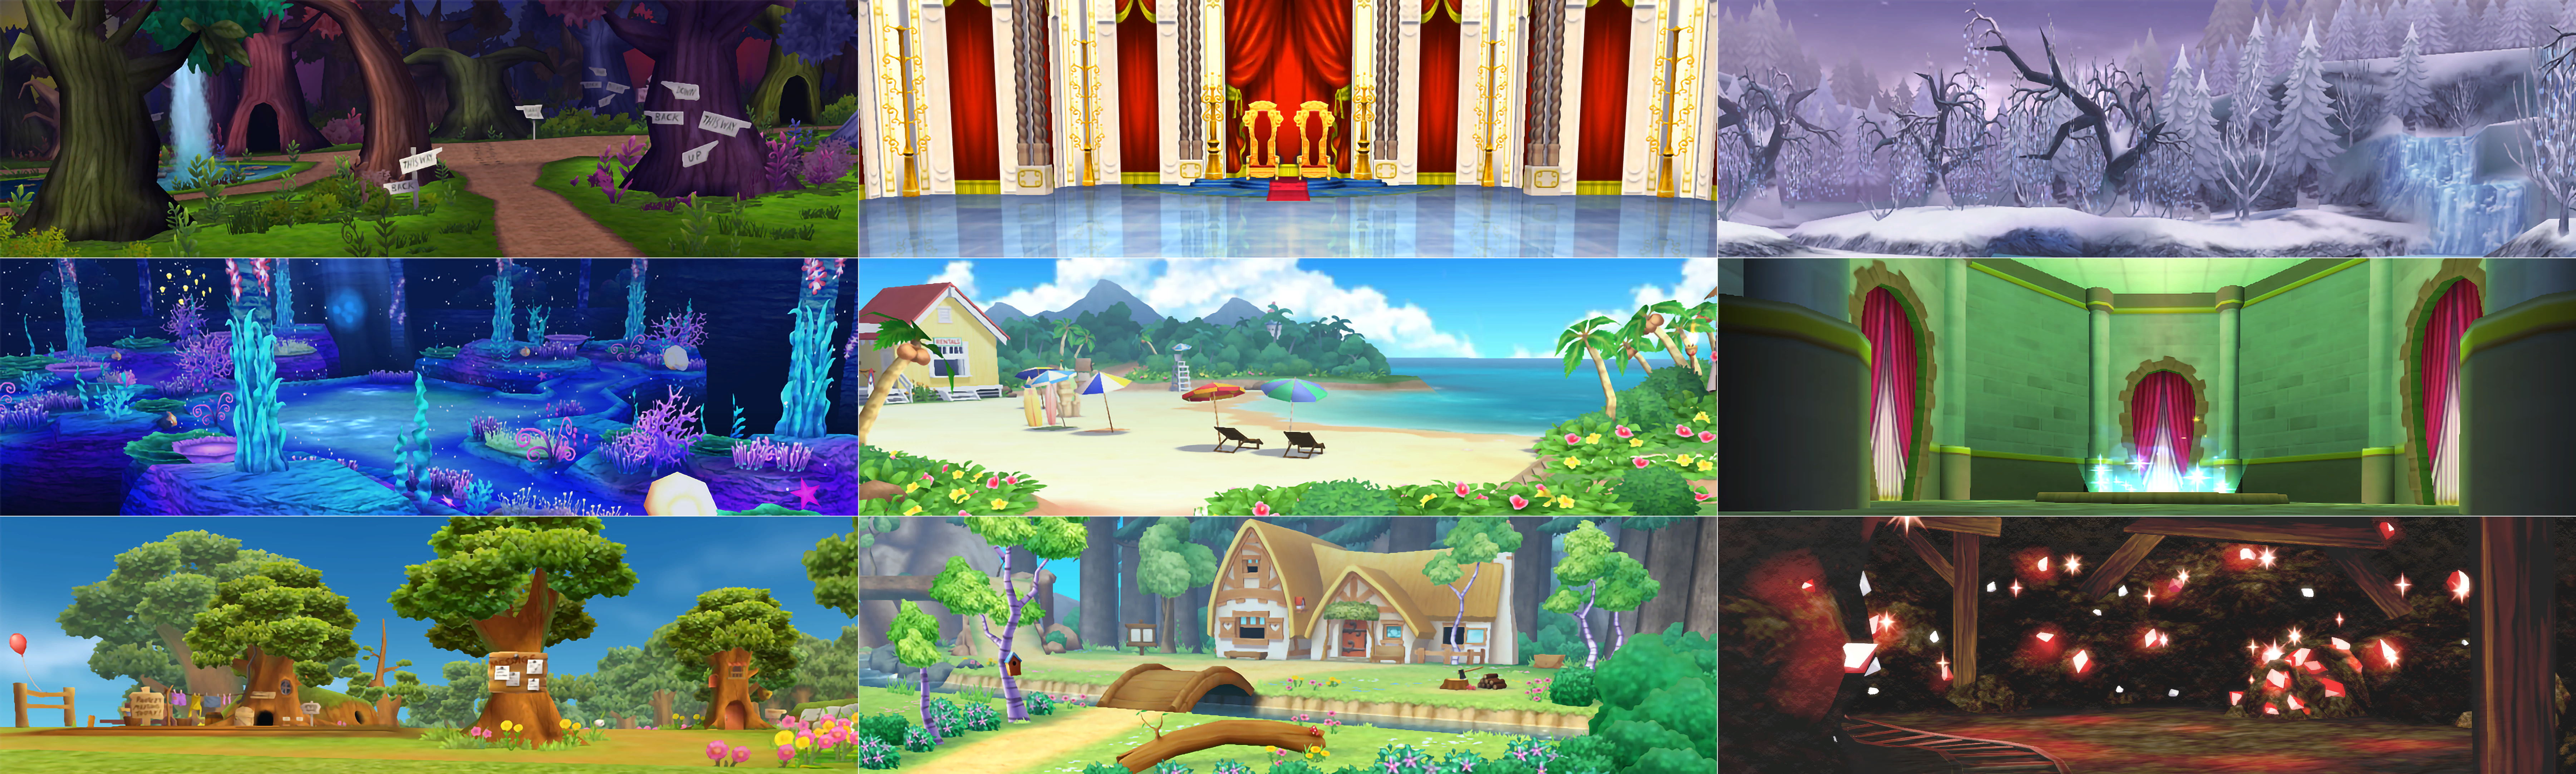 Disney Magical World 2: Enchanted Edition - Quest Backgrounds